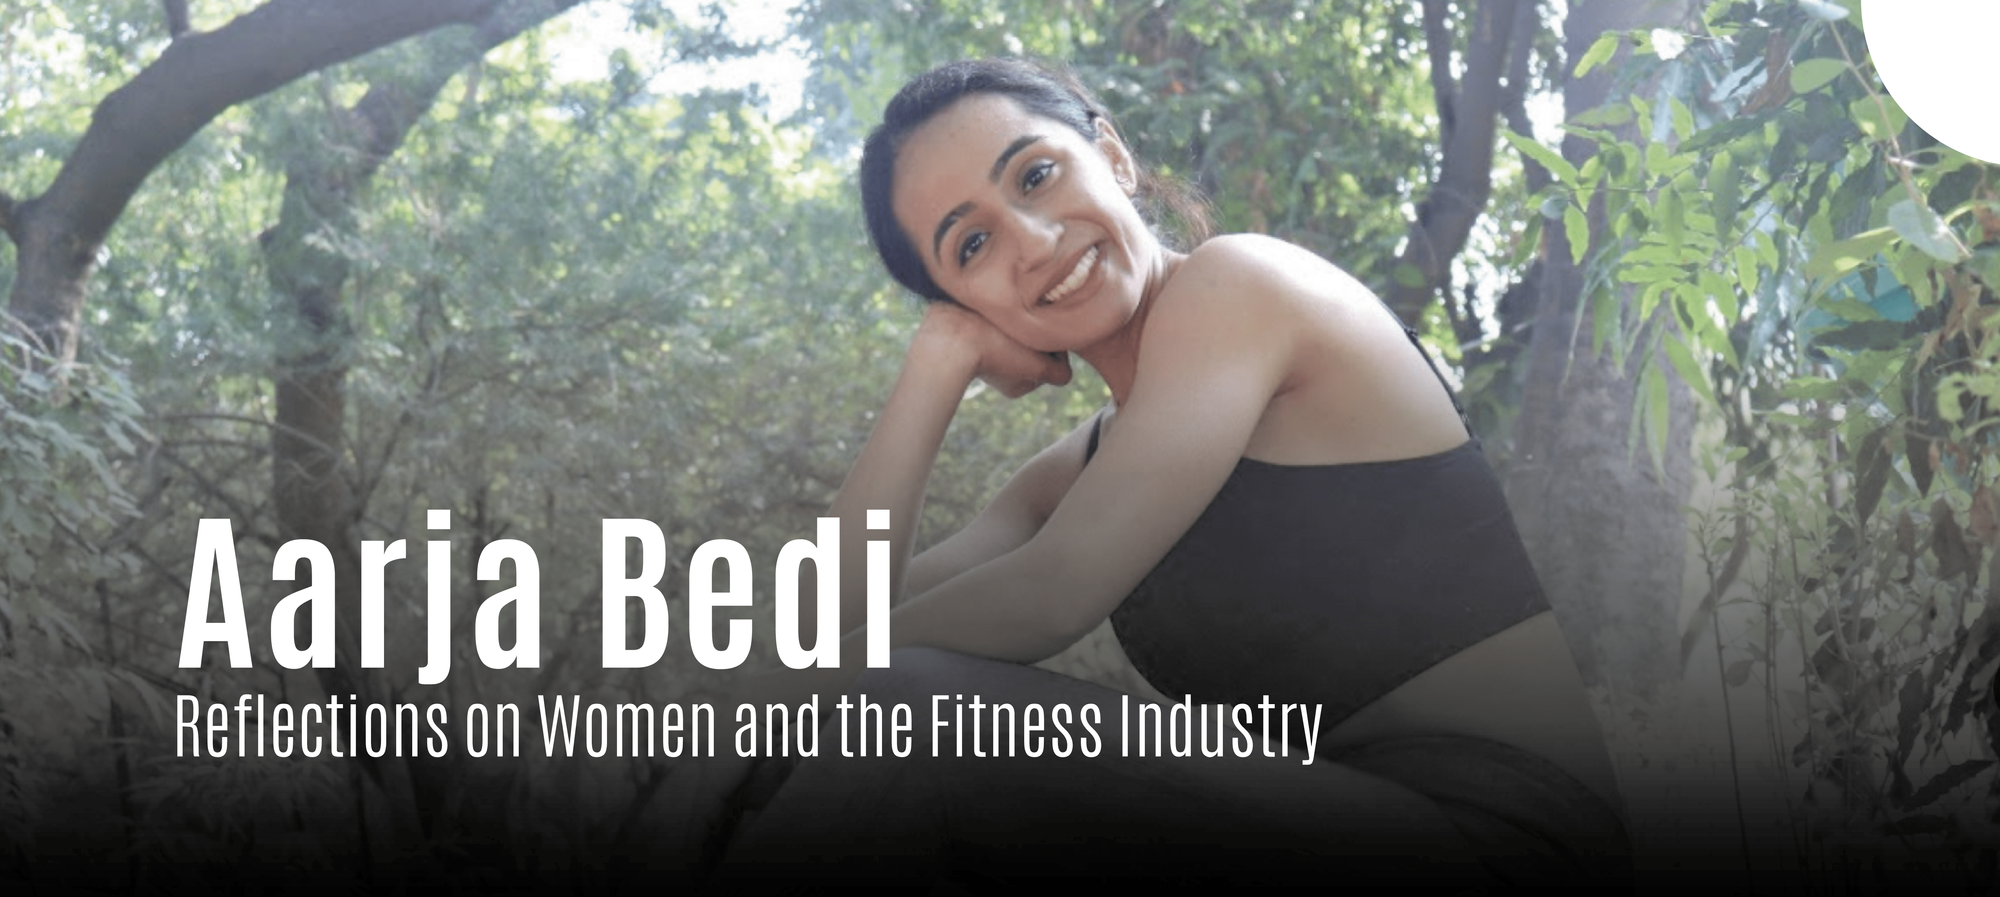 Aarja Bedi: Reflections on Women and the Fitness Industry